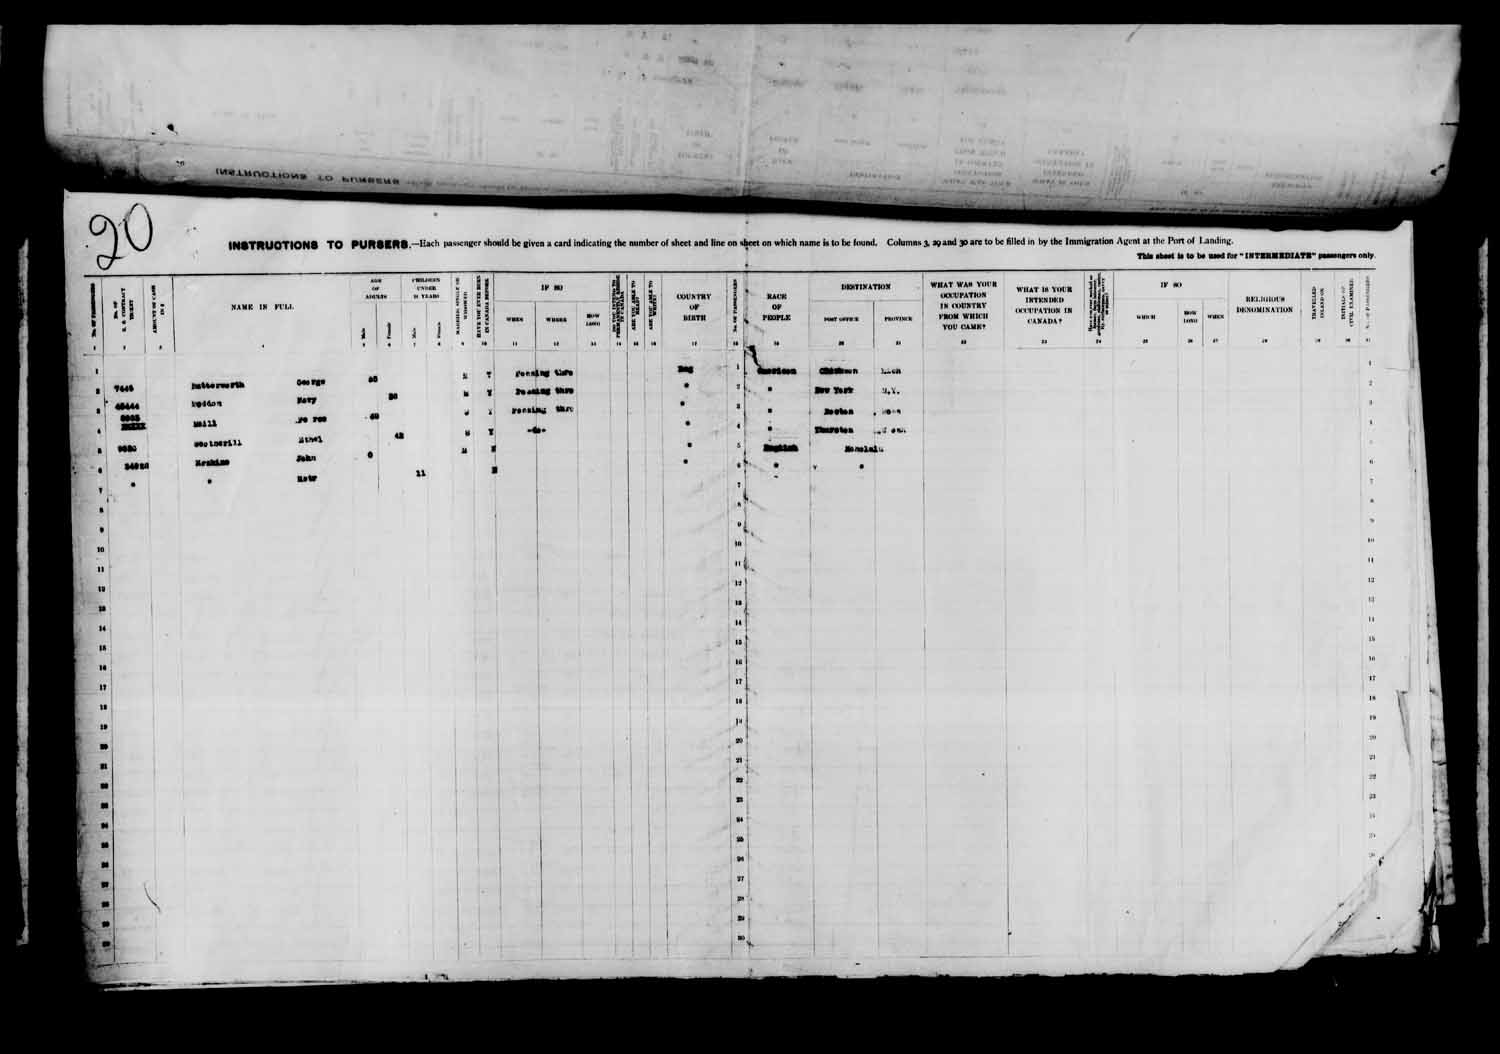 Digitized page of Passenger Lists for Image No.: e003610627